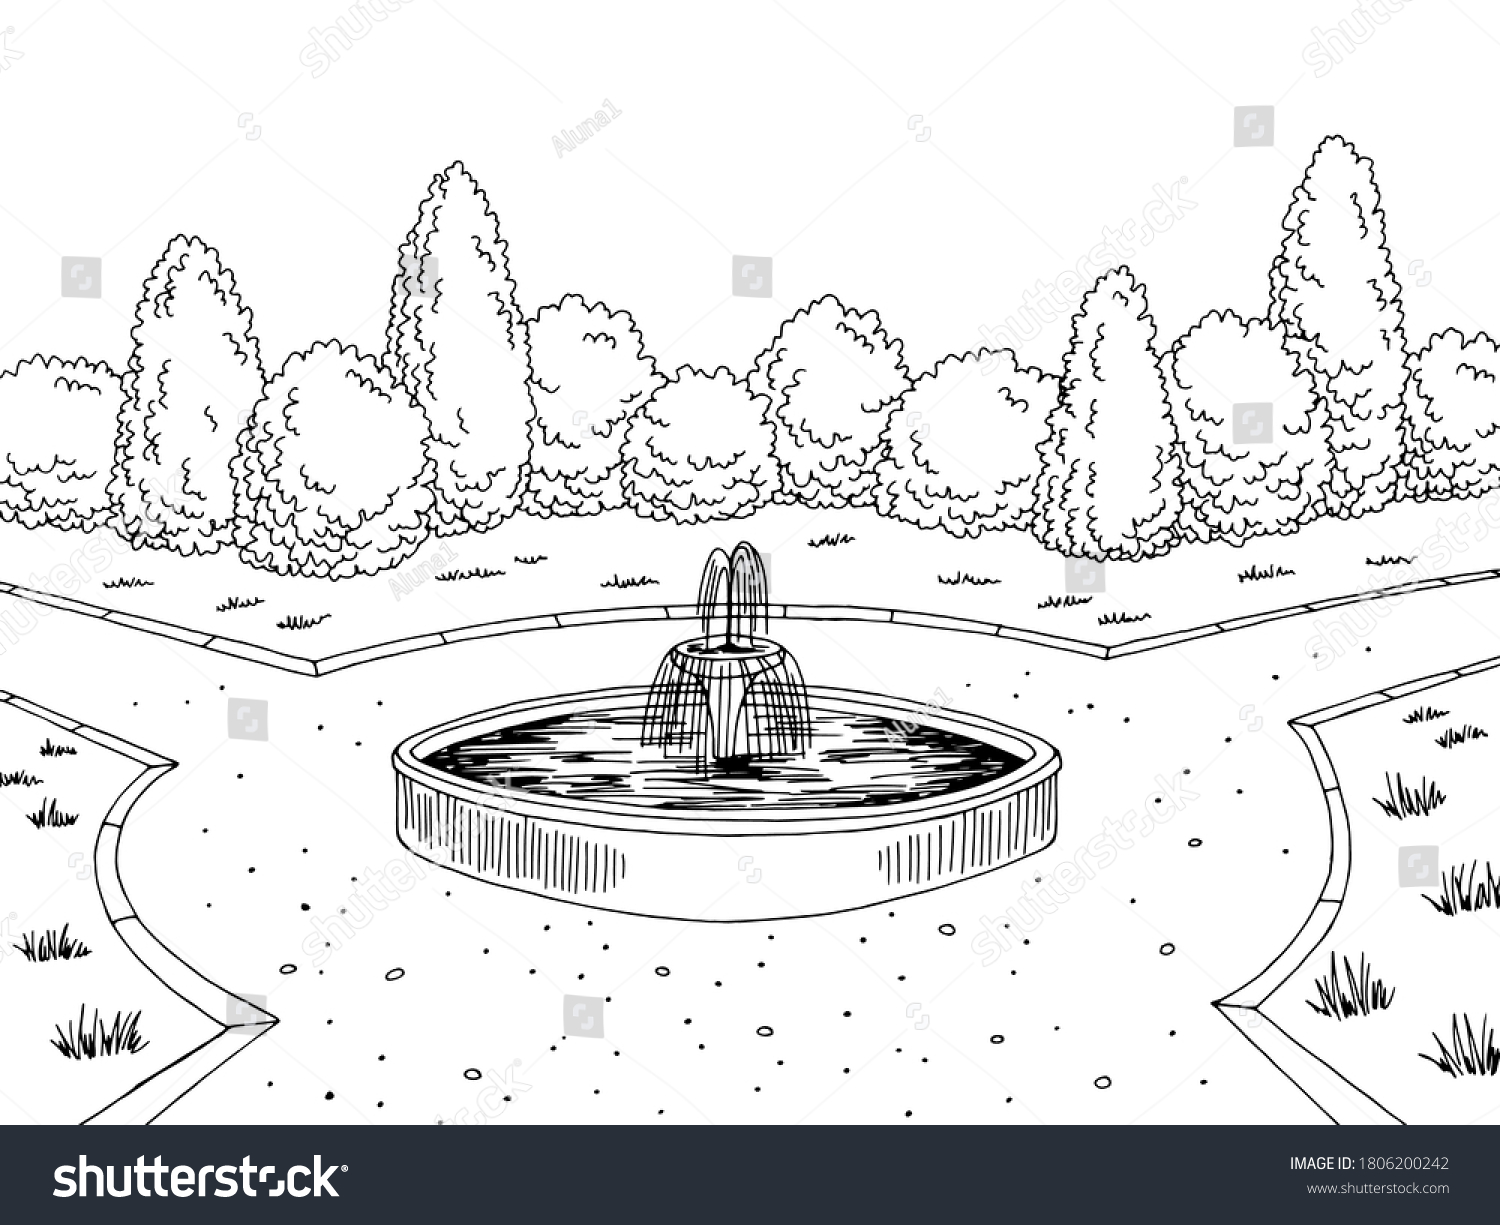 Park fountain graphic black white city stock vector royalty free